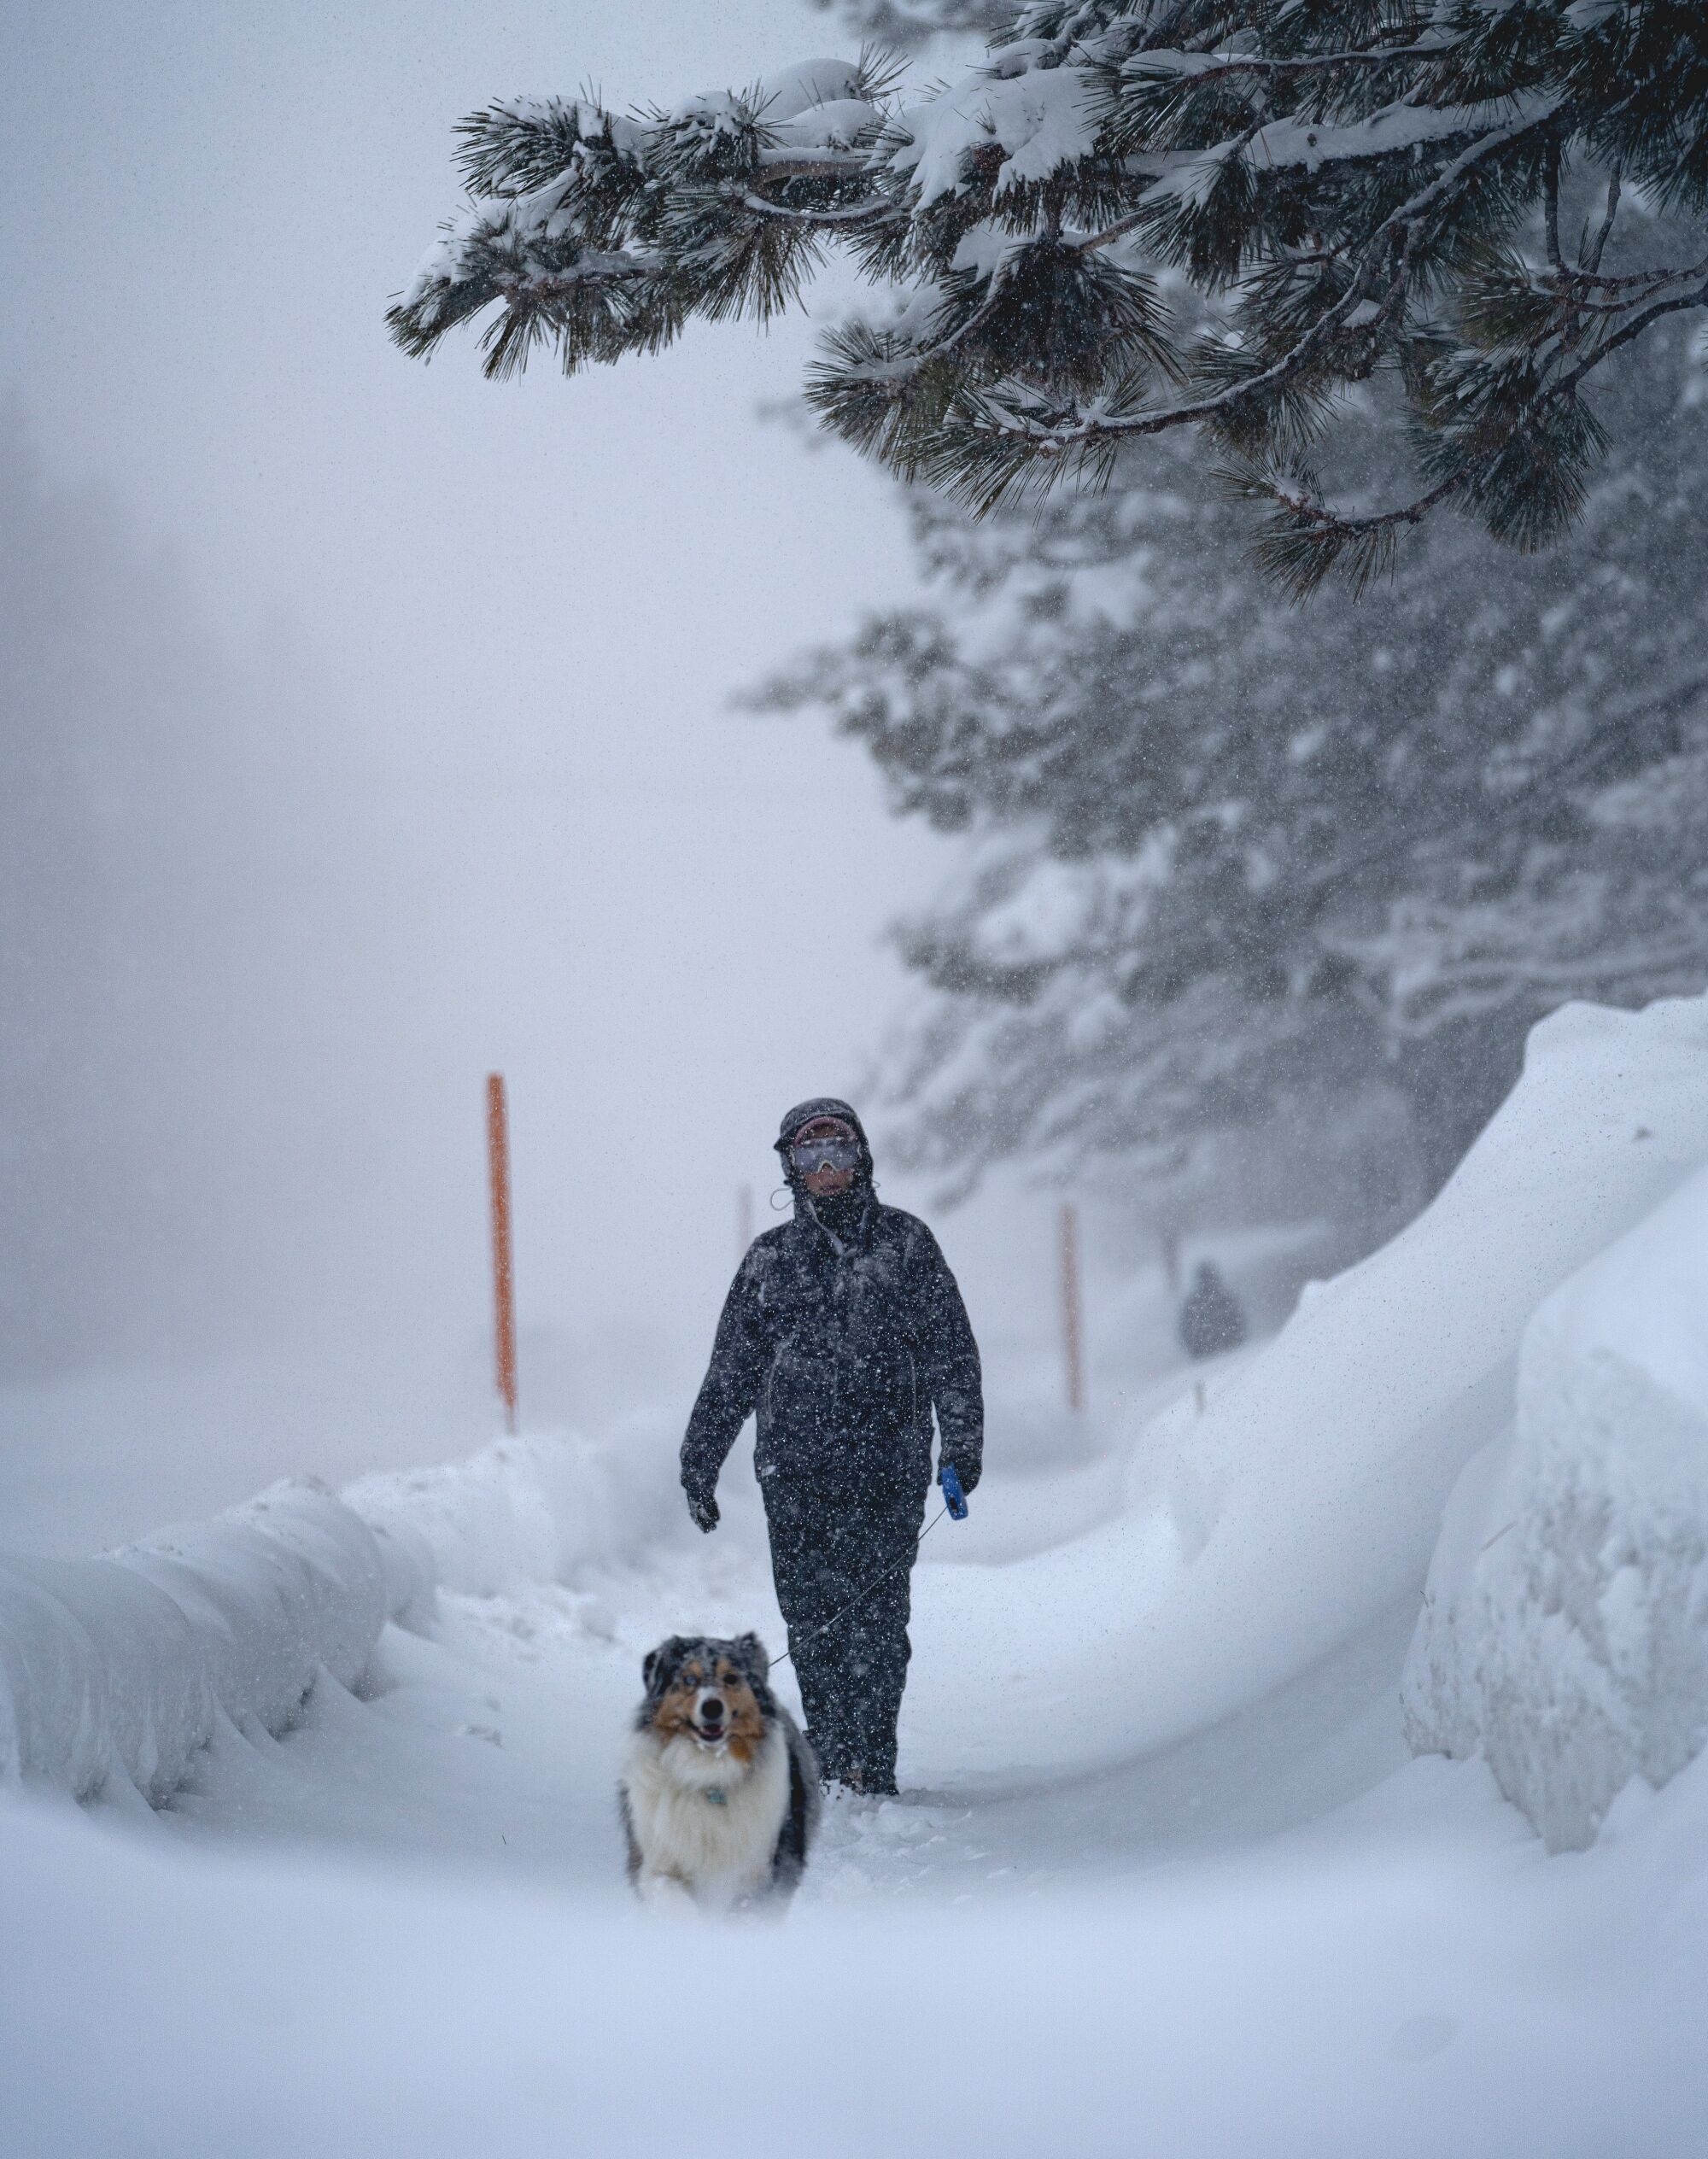 Mammoth Lakes, where the resort town has received 7 to 9 feet of new snow since Dec. 23.